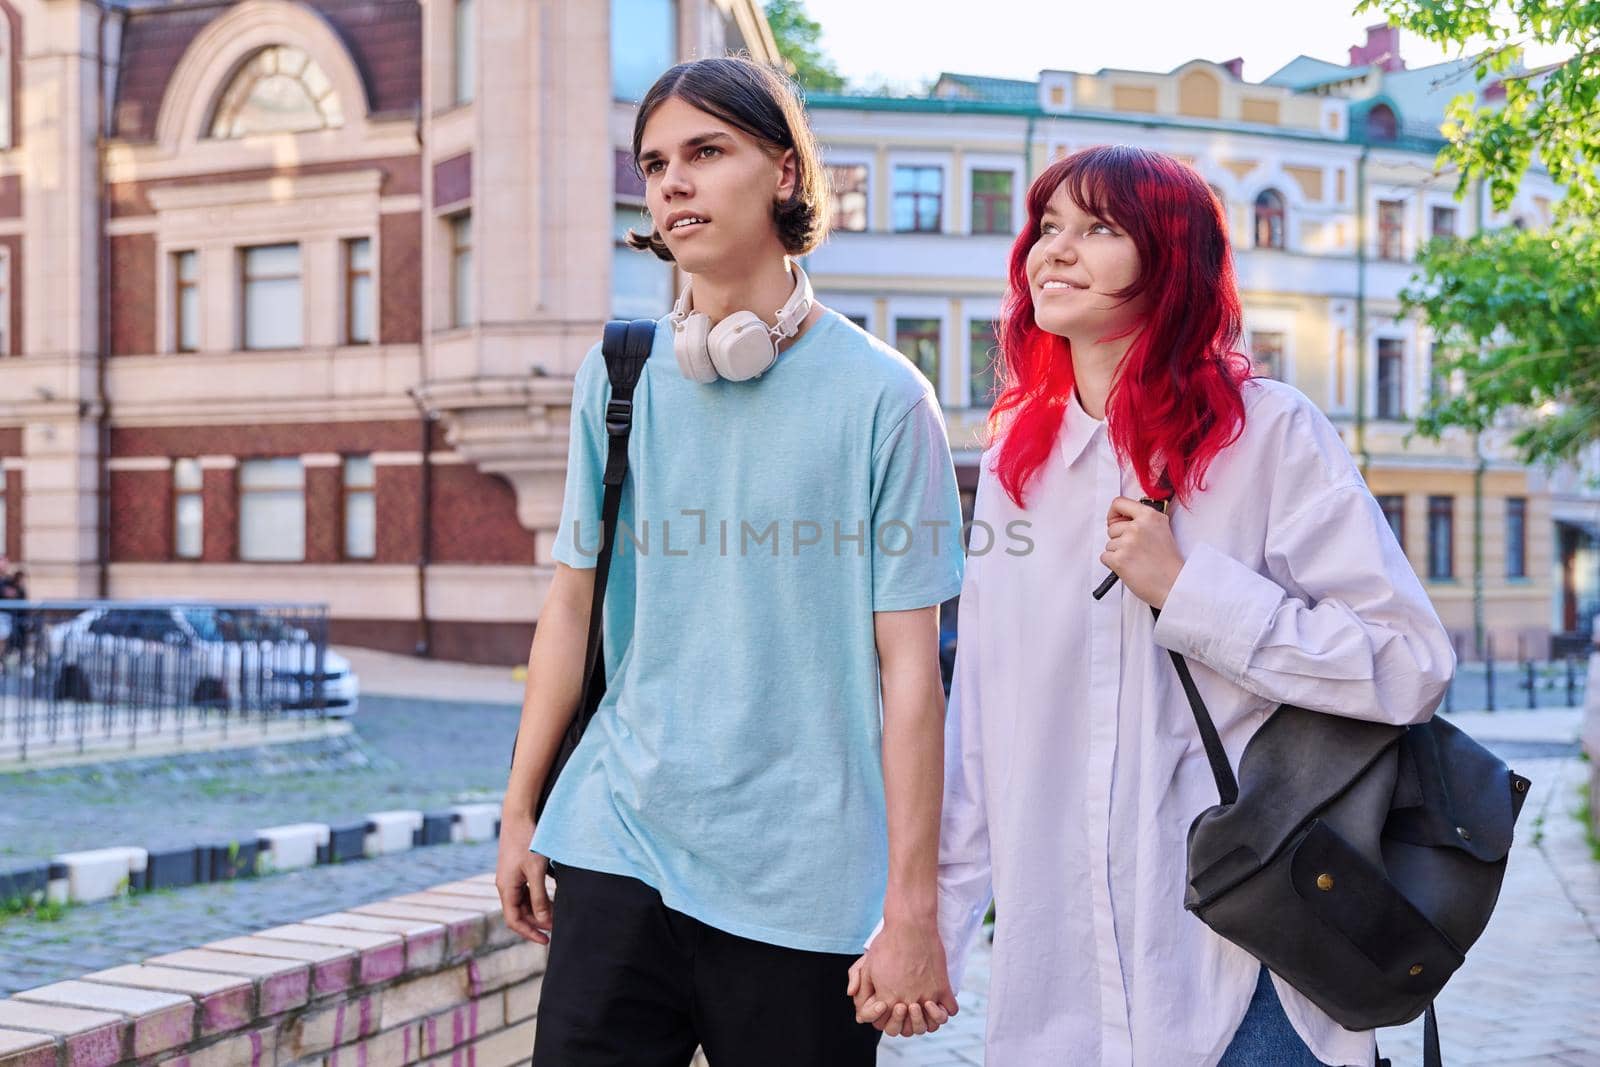 Couple of happy teenage friends walking holding hands, outdoor, on city street. Friendship, romantic, youth, leisure, relationship, lifestyle concept